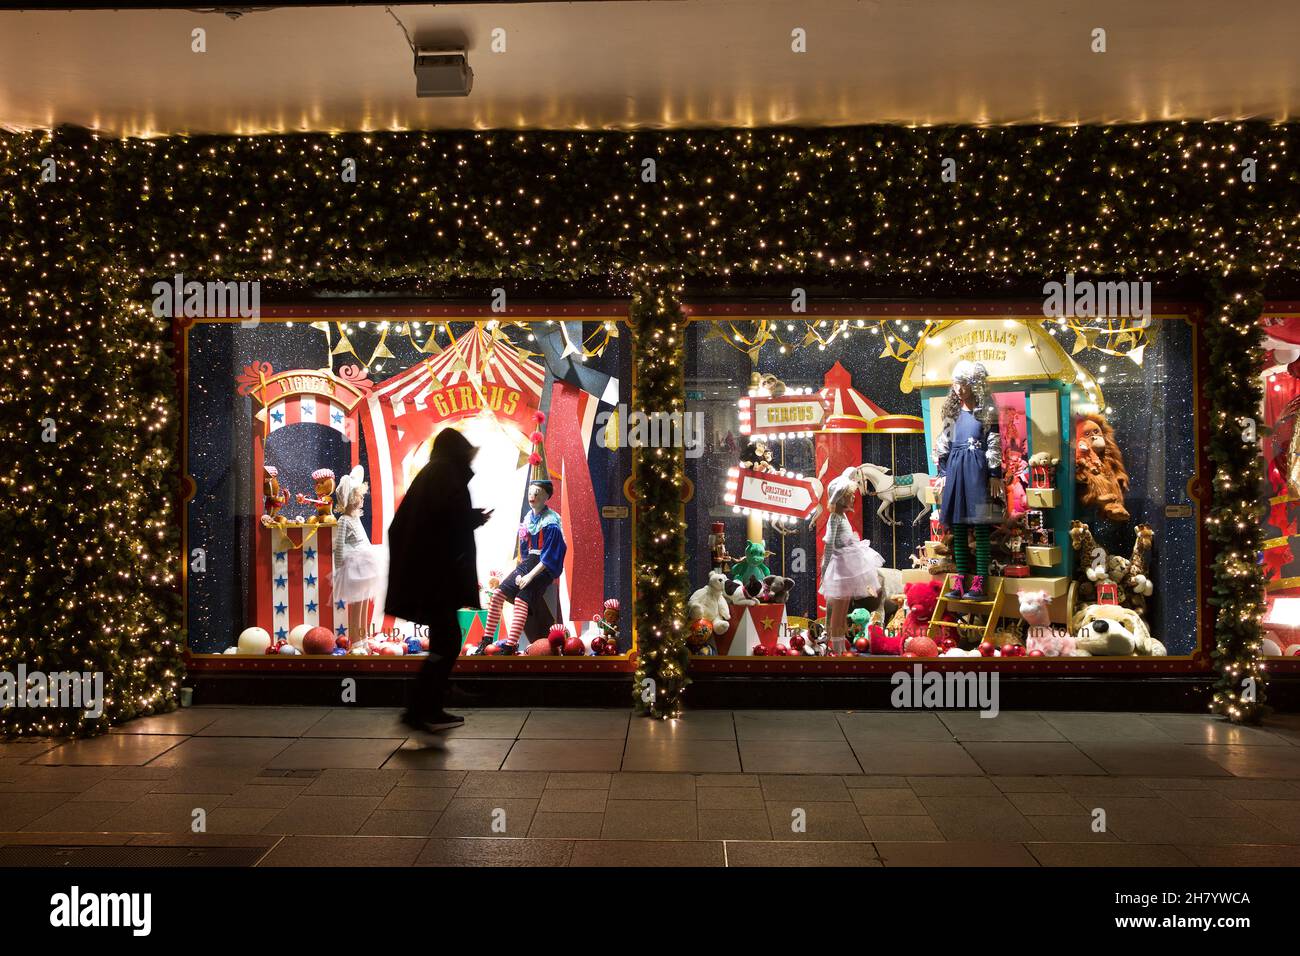 Dublin, Ireland - November 24, 2021: a passerby admires the circus themed Christmas window display at Arnotts Department Store on Henry Street. Stock Photo